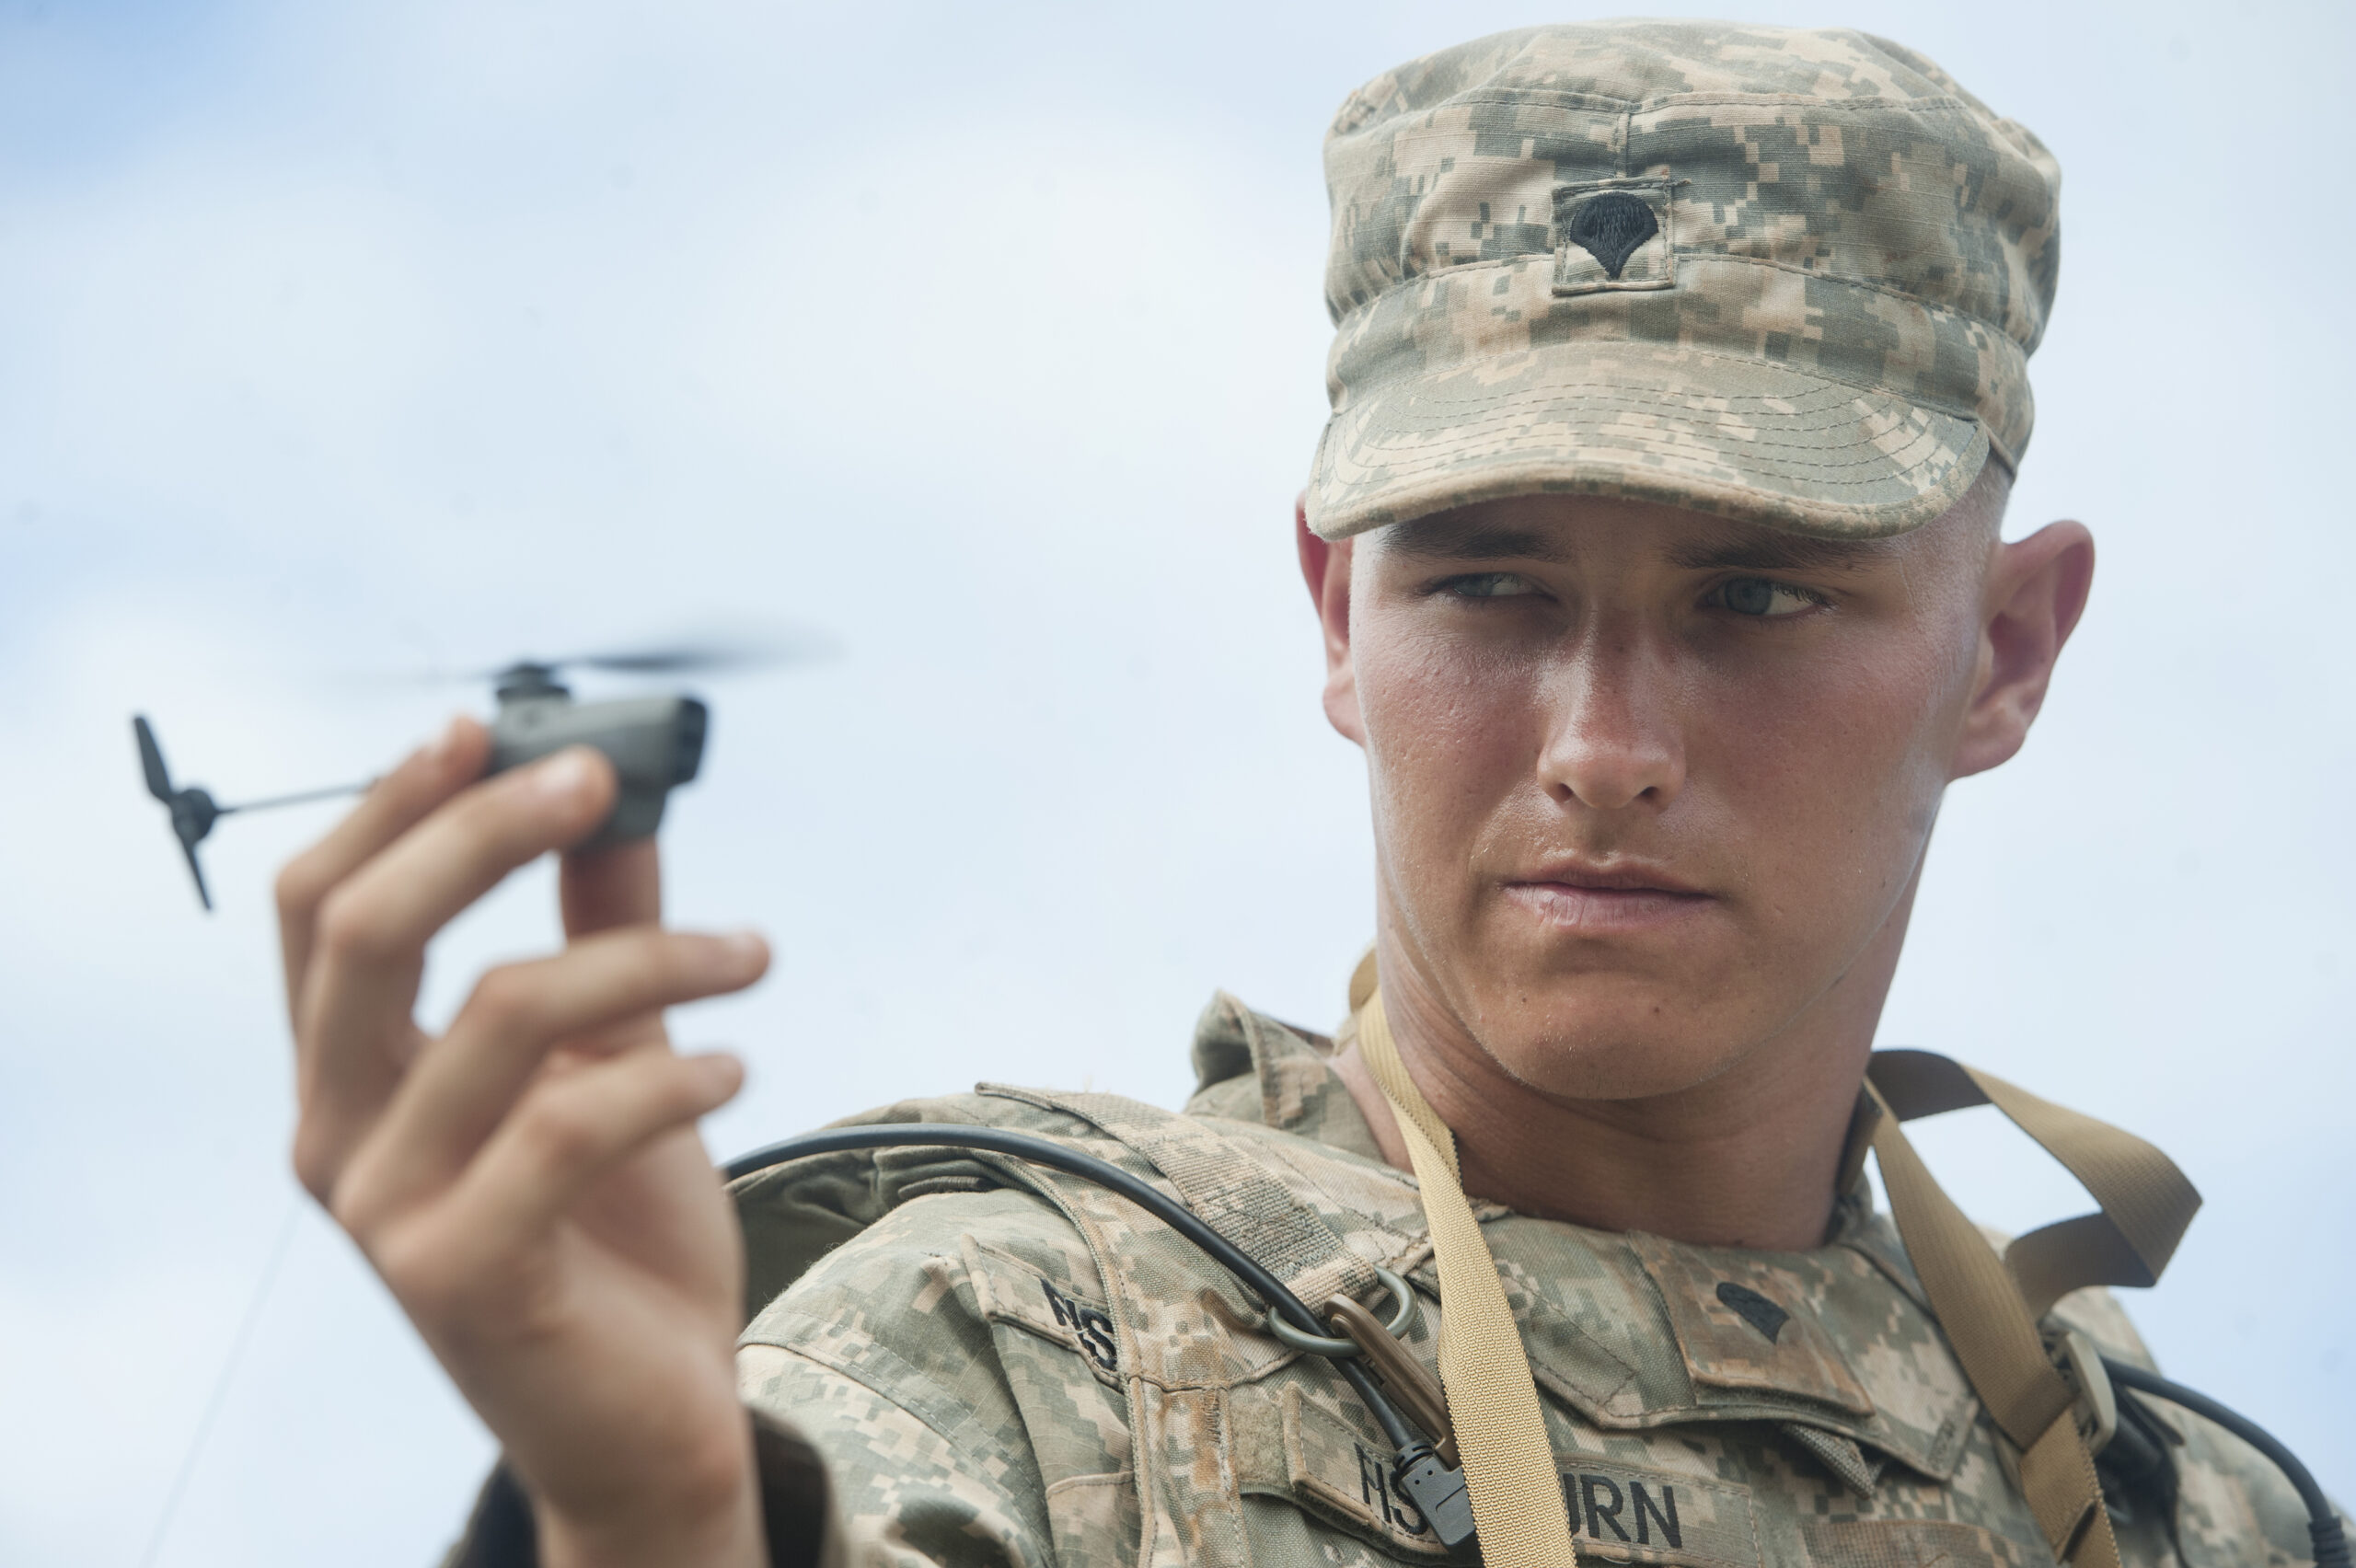 Tiny Drones Win Over Army Grunts; Big Bots? Not So Much